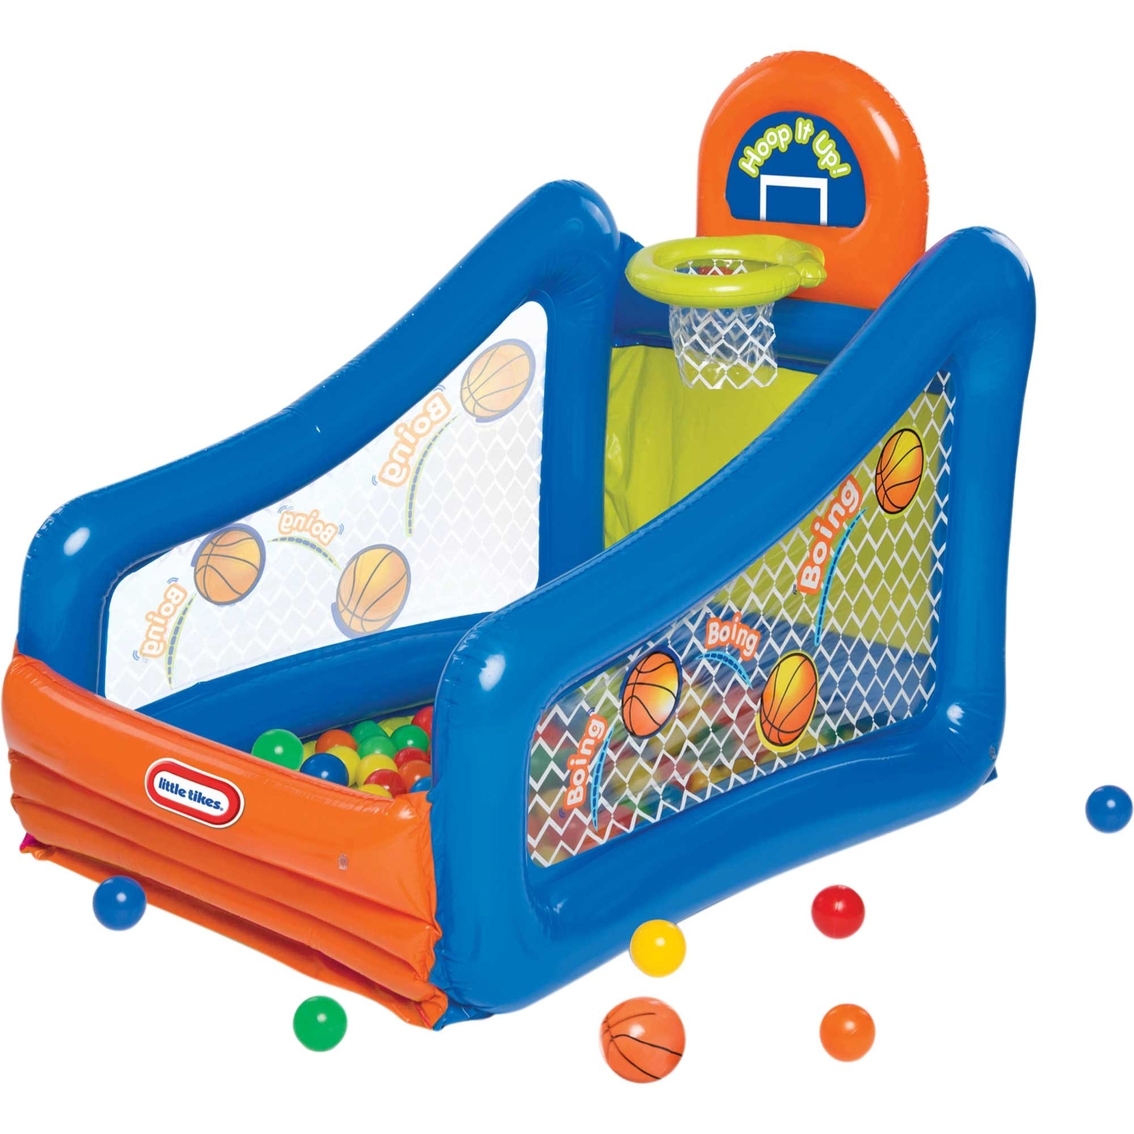 Little Tikes Hoop It Up! Play Center Ball Pit - Image 1 of 3